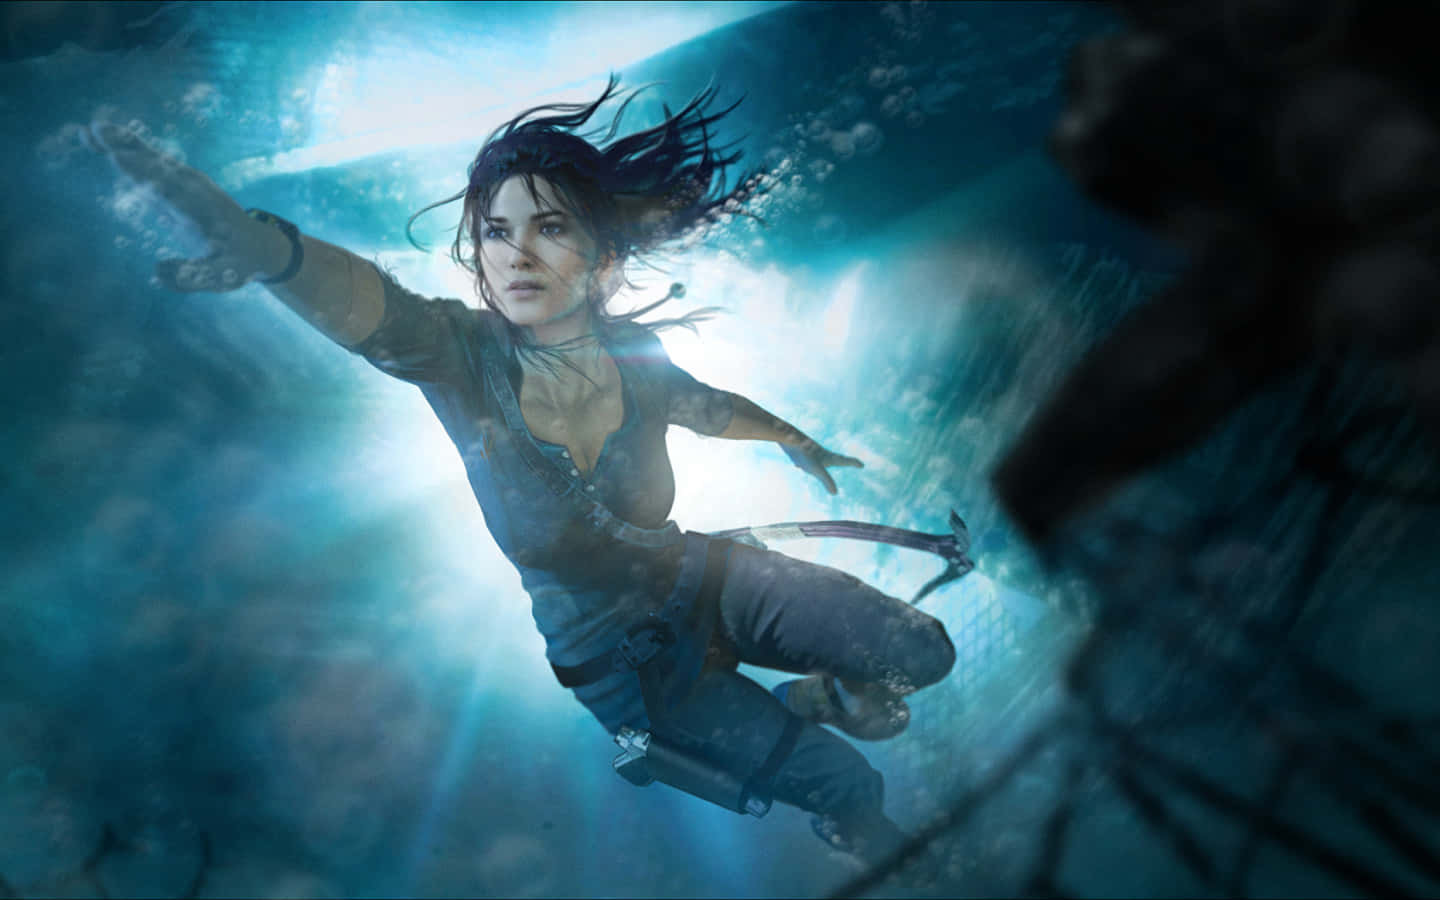 The Lara Croft Poster With A Woman In The Water